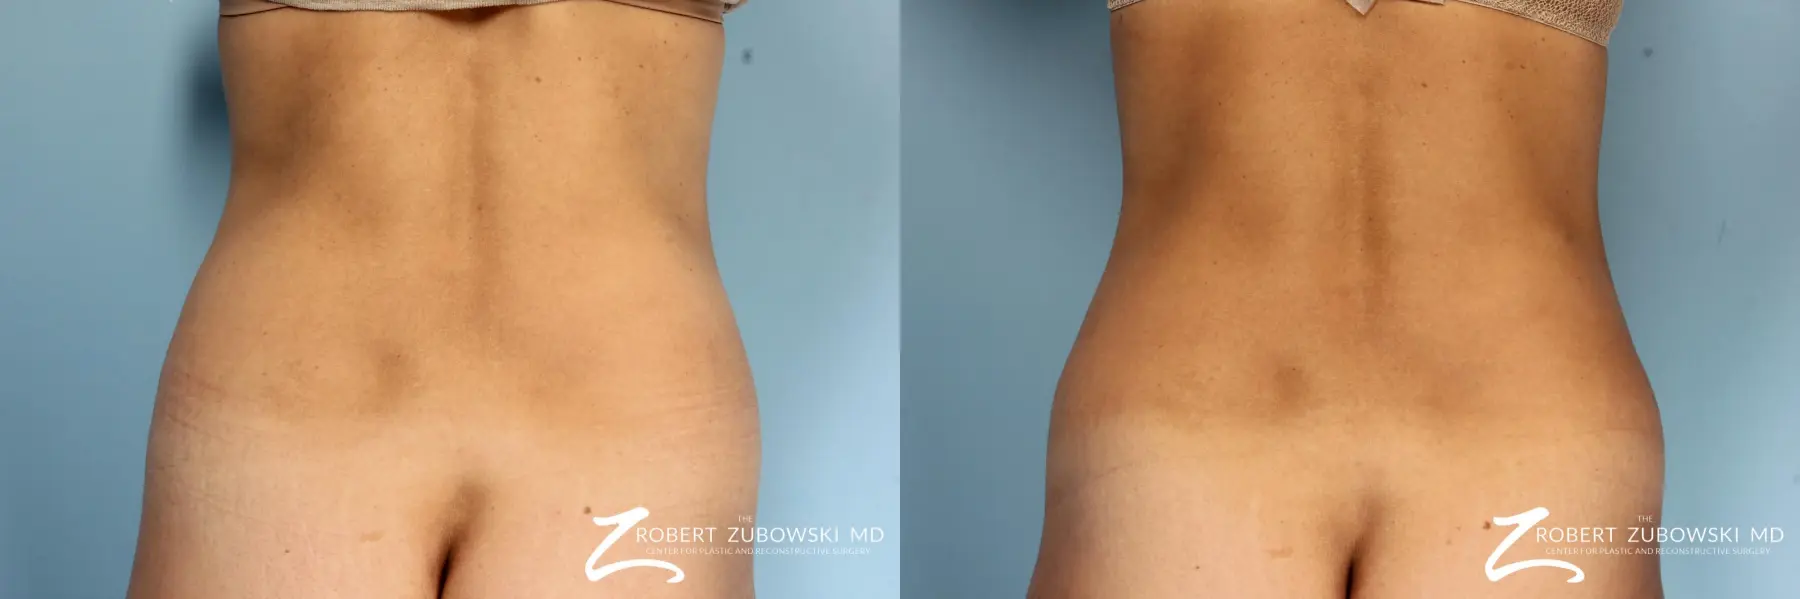 CoolSculpting®: Patient 4 - Before and After 2